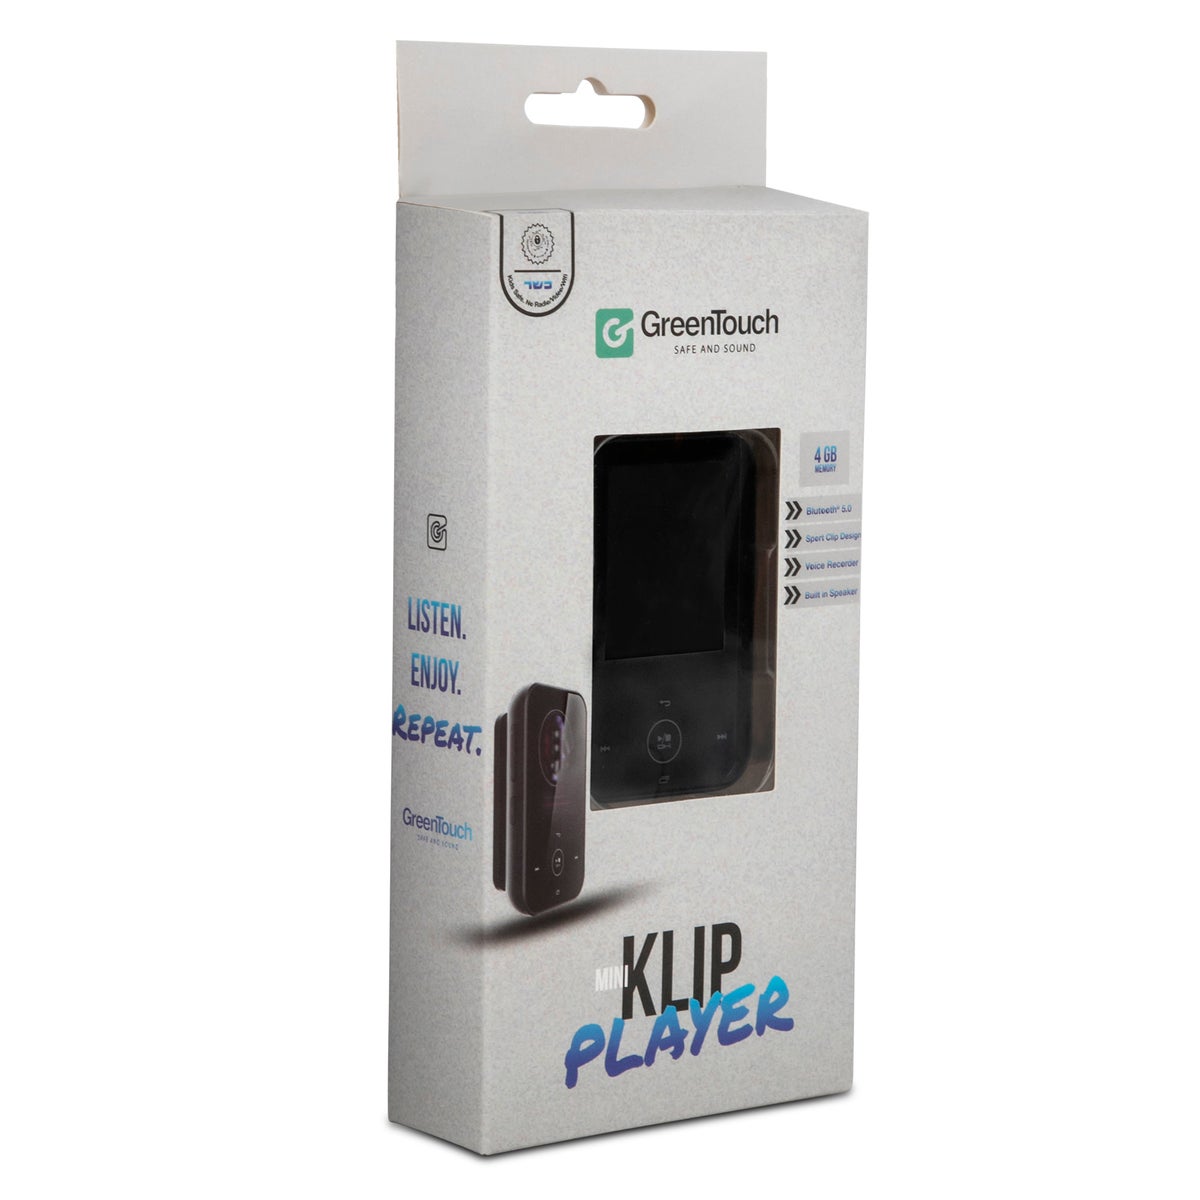 Greentouch - Mini Klip Bluetooth Kosher MP3 Player, Includes Silicone Case and Screen Protector